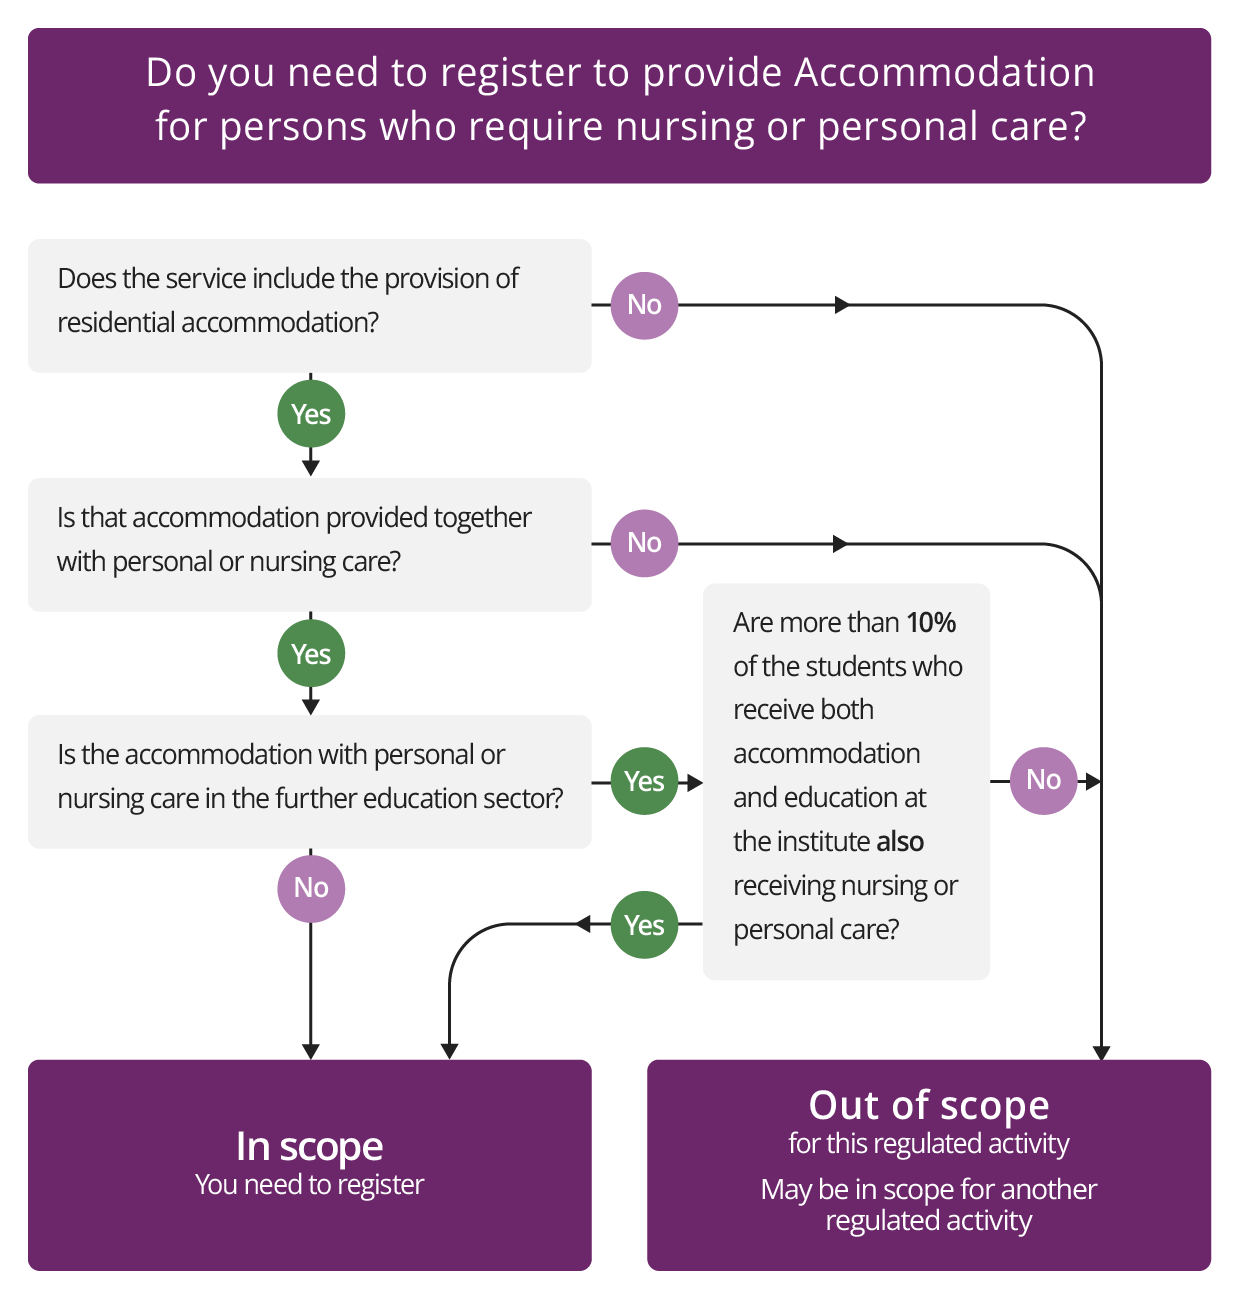 Diagram alternative to the guidance for Accommodation for persons requiring nursing or personal care.